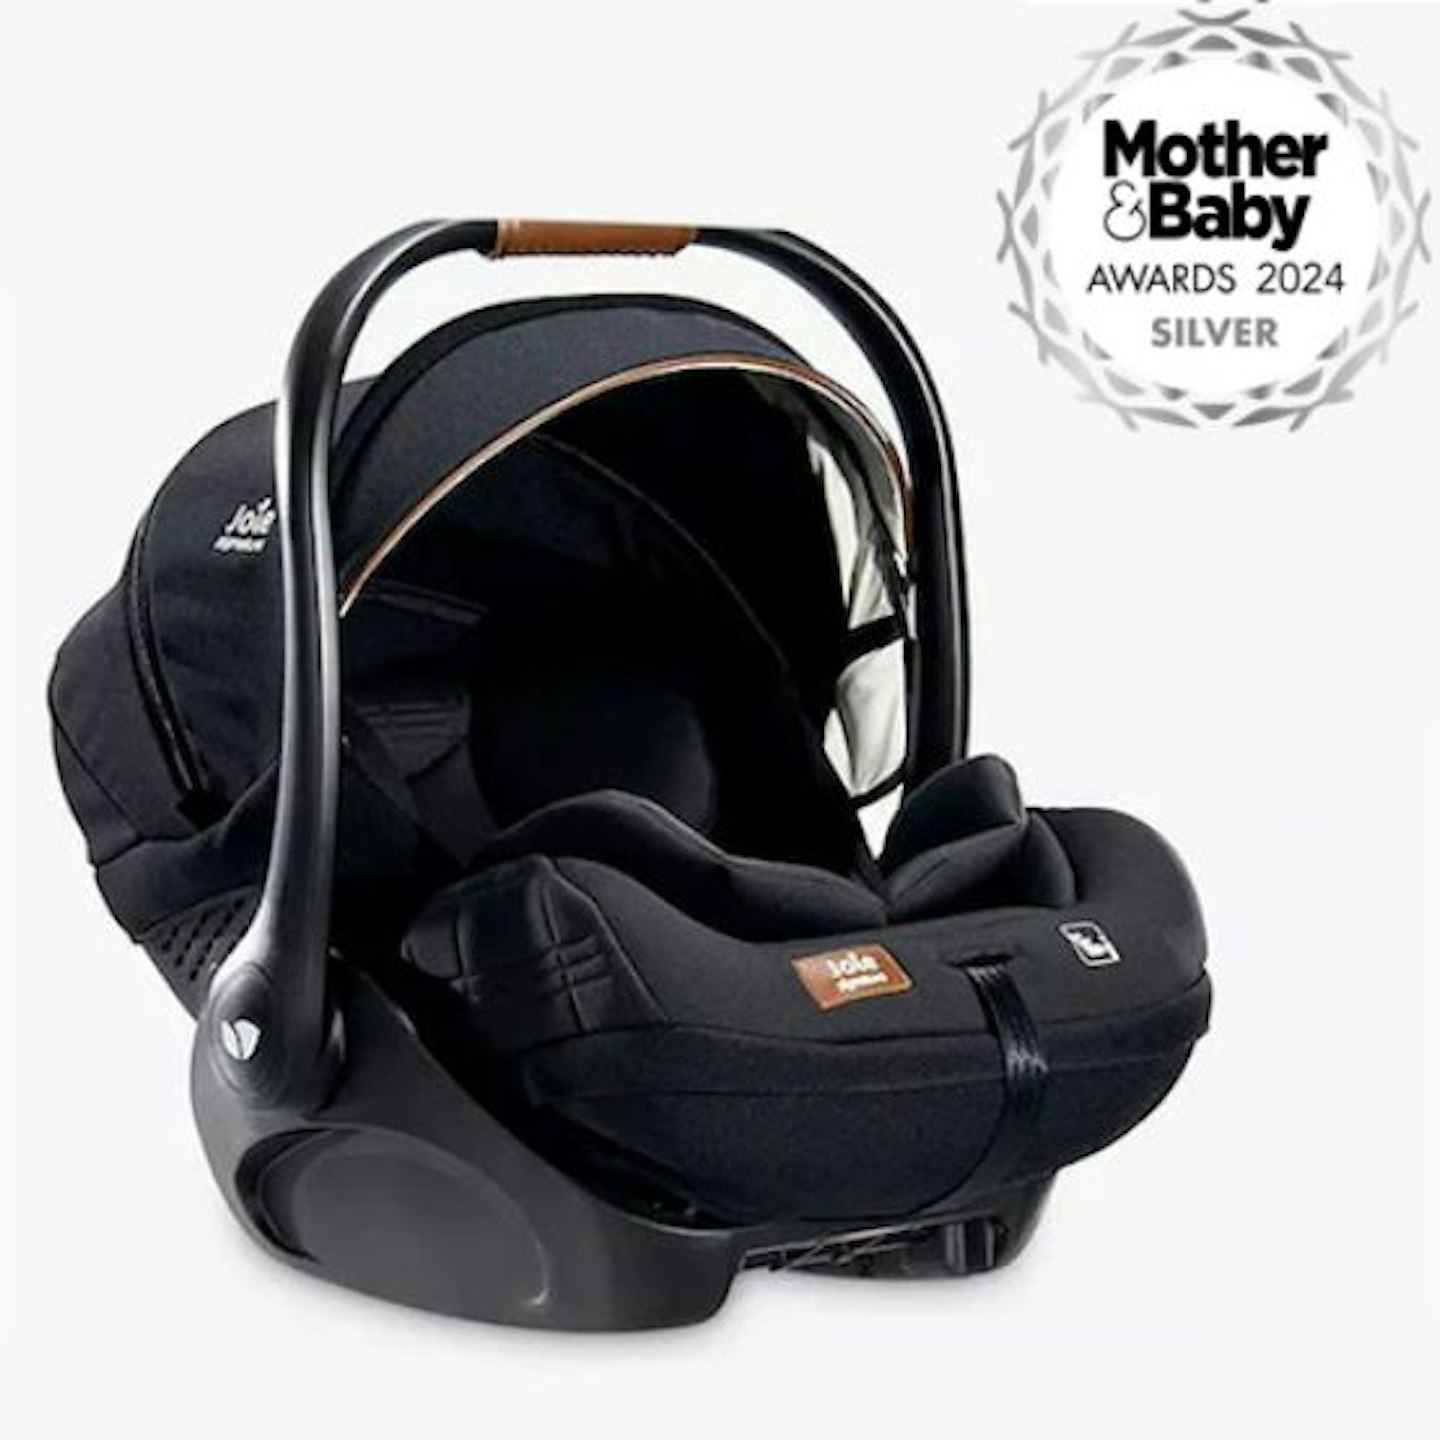 The best car seats for your baby